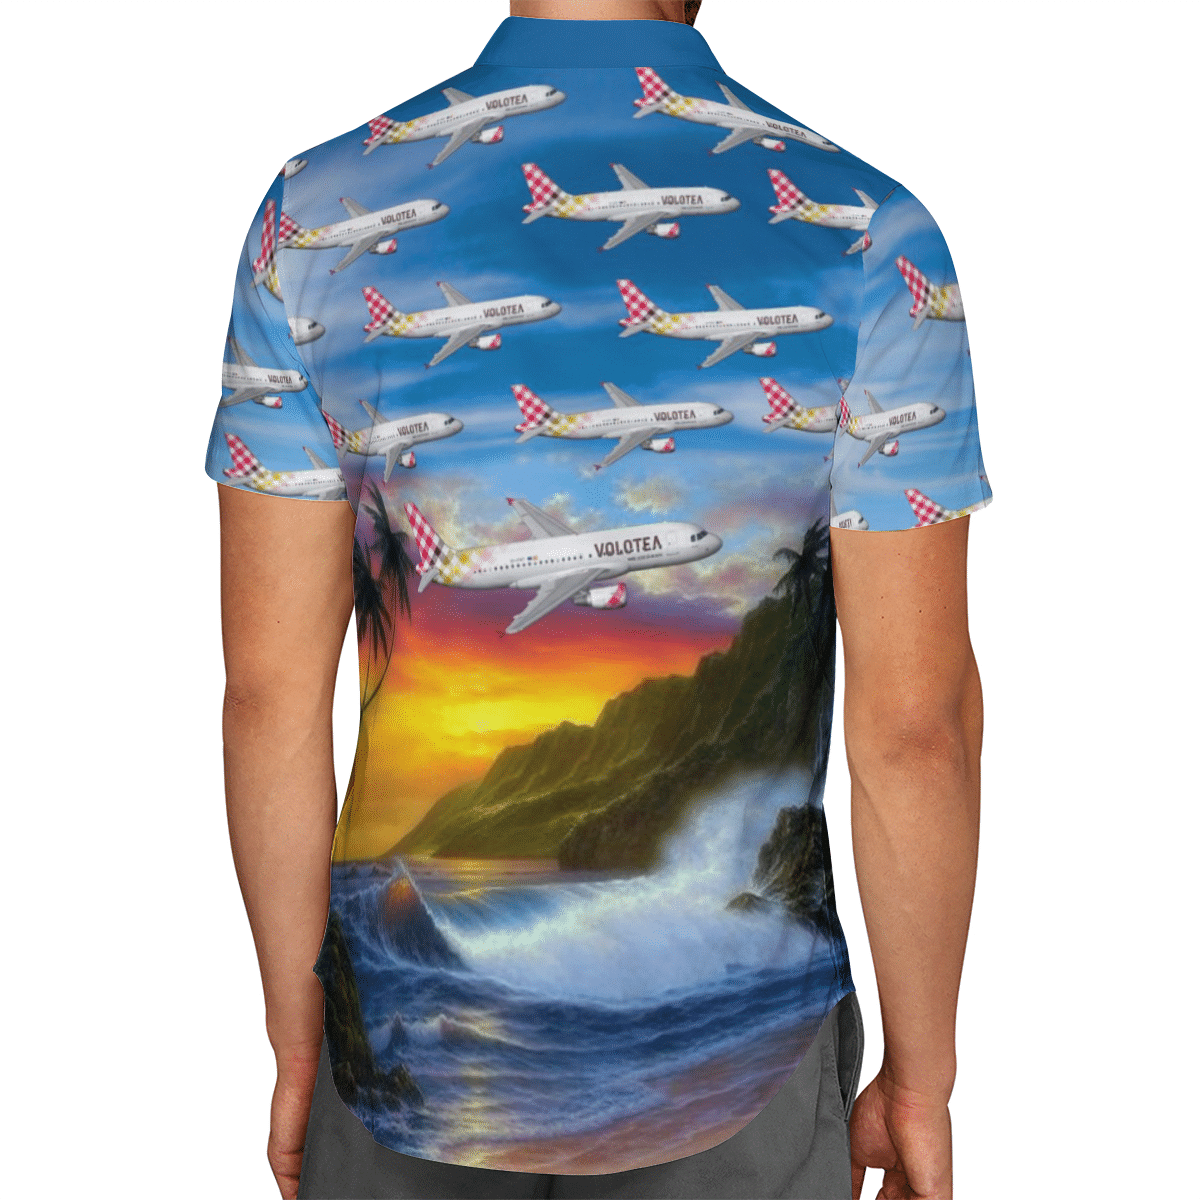 Going to the beach with a quality shirt 49